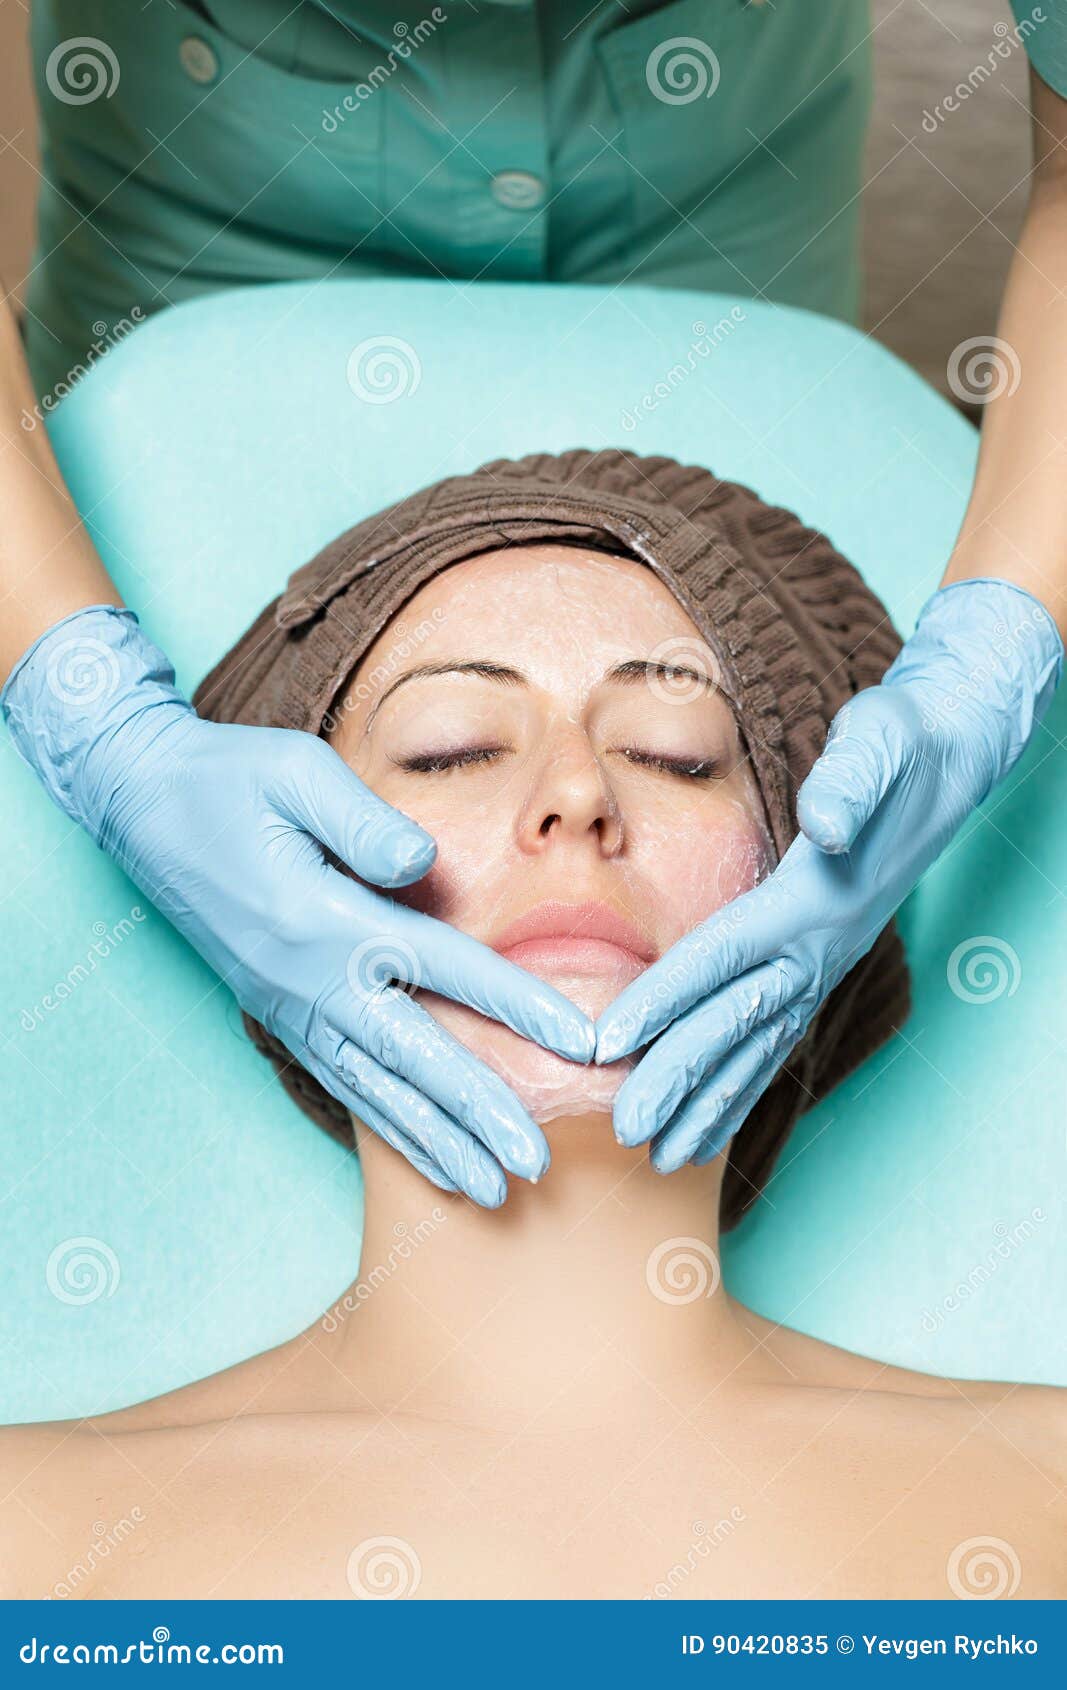 Anti Aging Facial Massage Cosmetologist Doing Massage For Young Woman At Spa Salon Stock Image